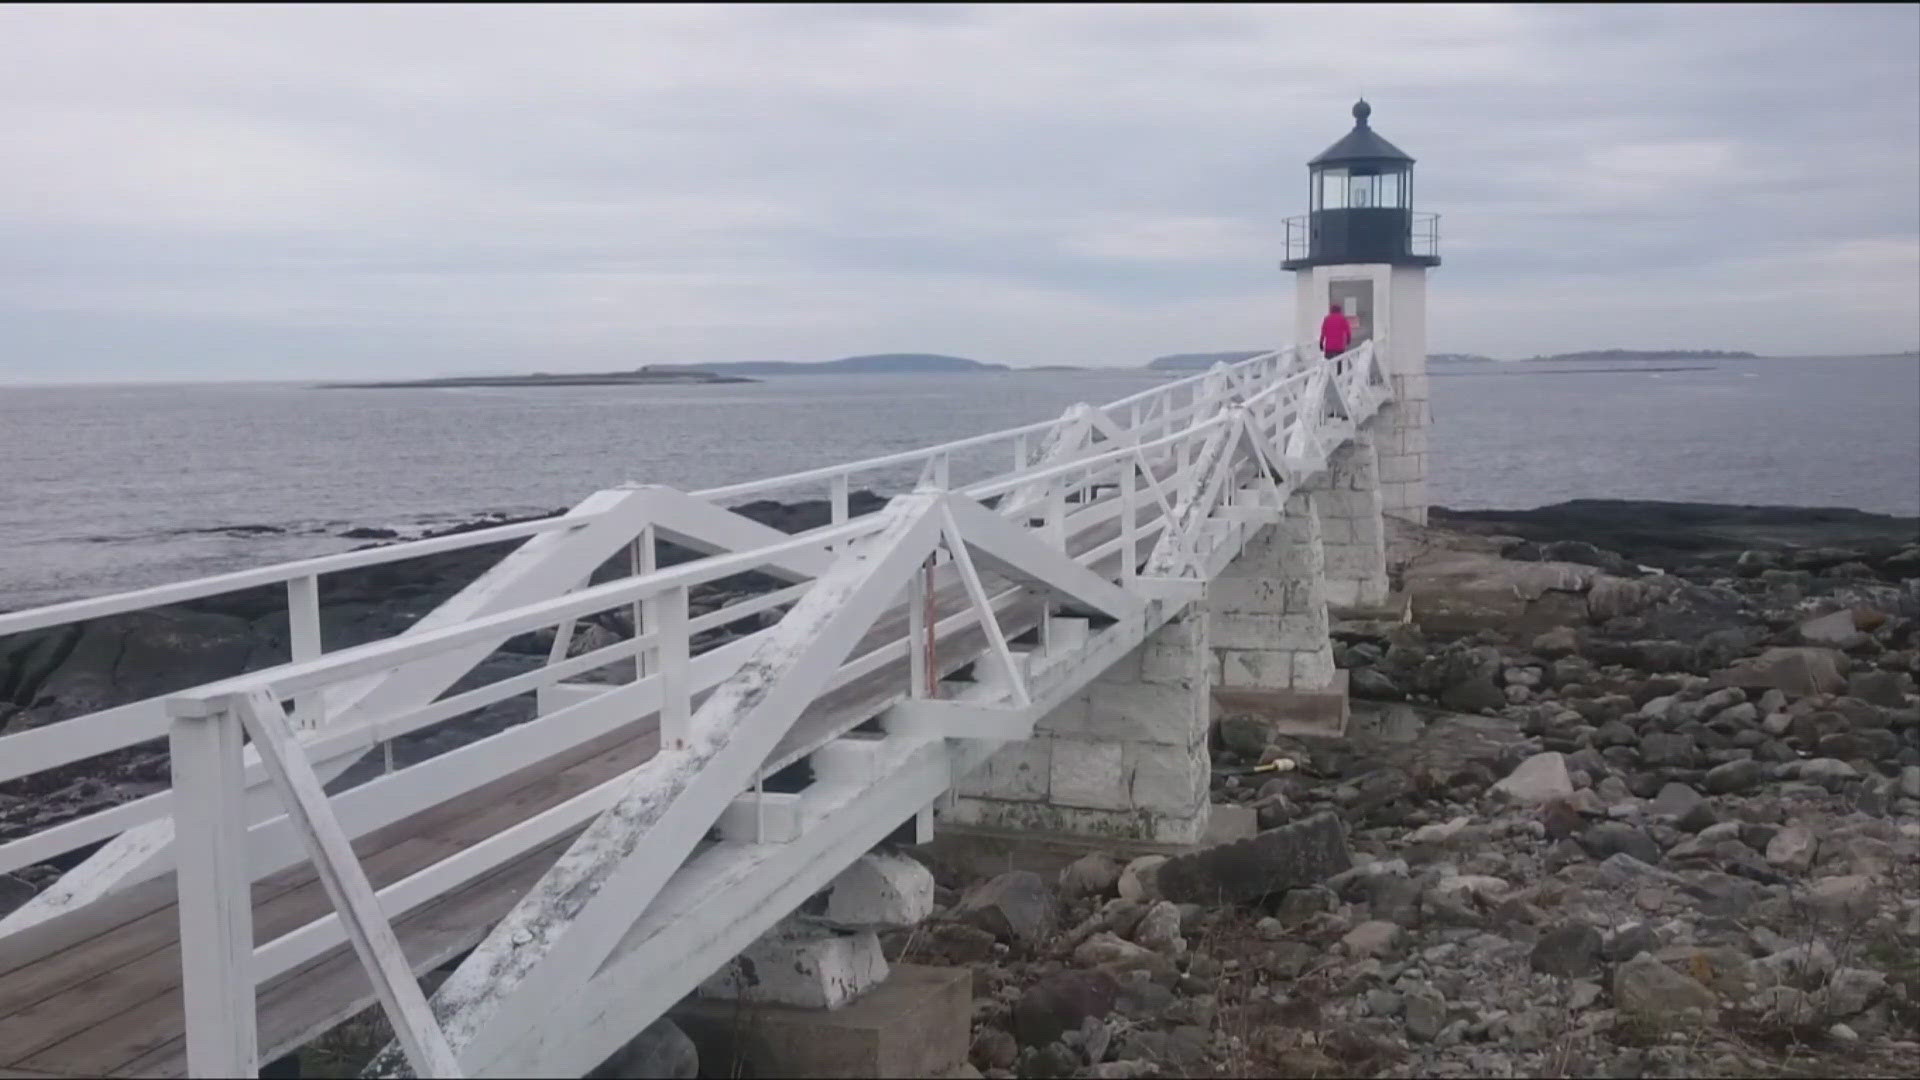 Lighthouse officials say the walkway leading up to the lighthouse tower is damaged, but they did not specify what caused the structural damage.